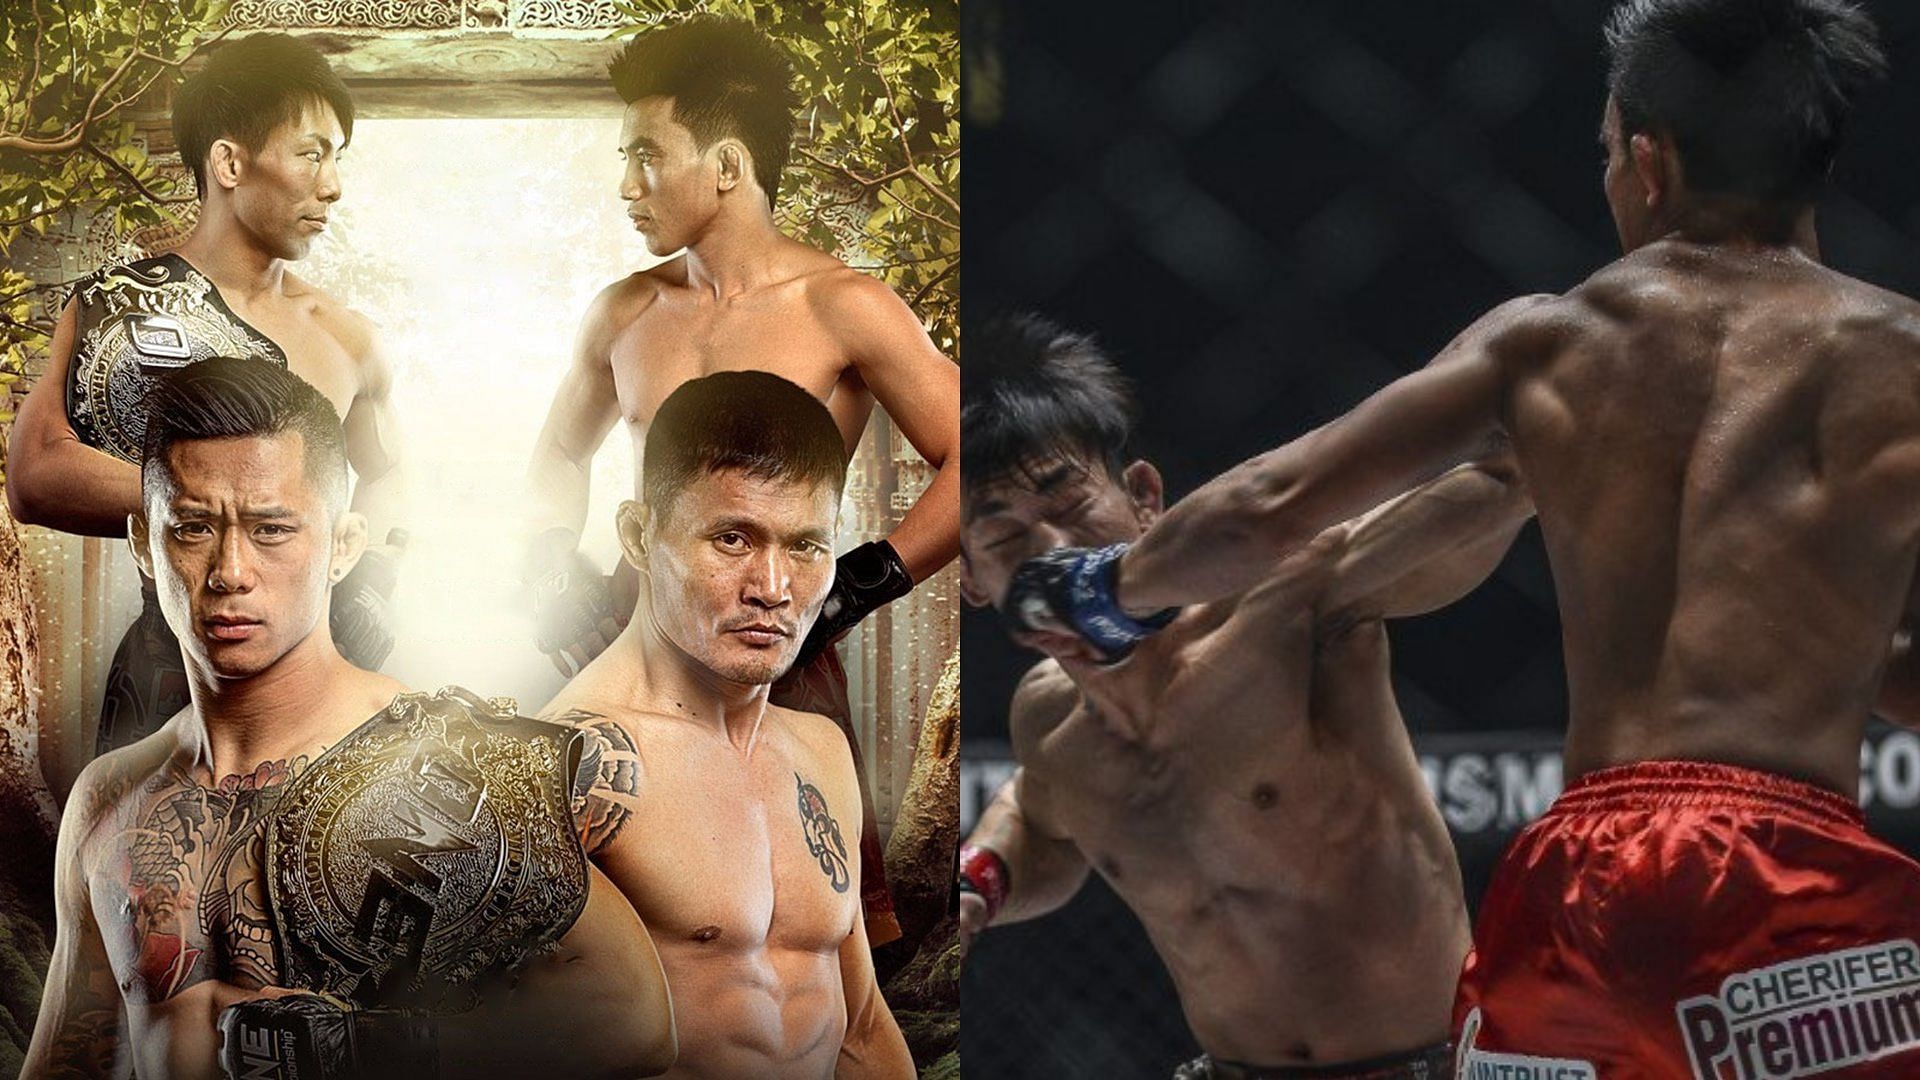 [Photo Credits: ONE Championship and Cage Side Press] ONE Roots of Honor